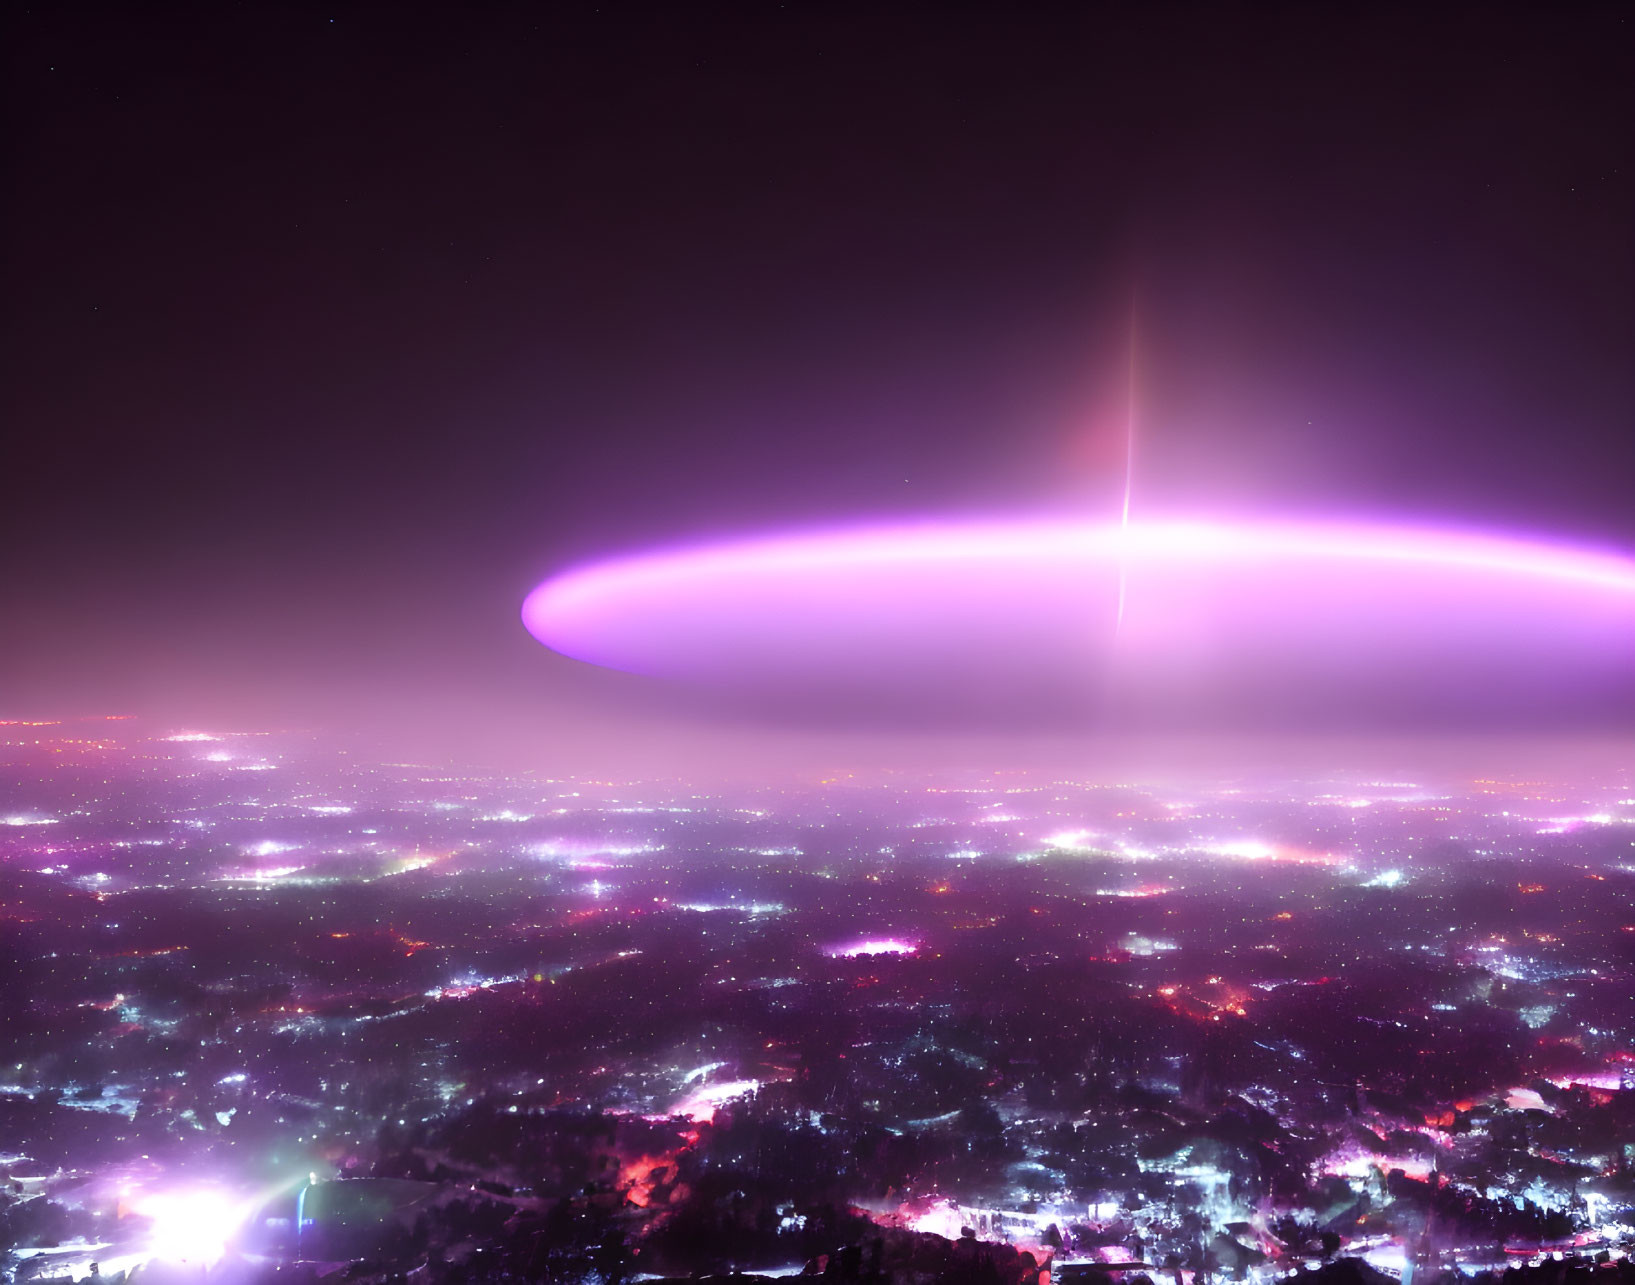 Glowing purple and pink UFO over night cityscape with white beam